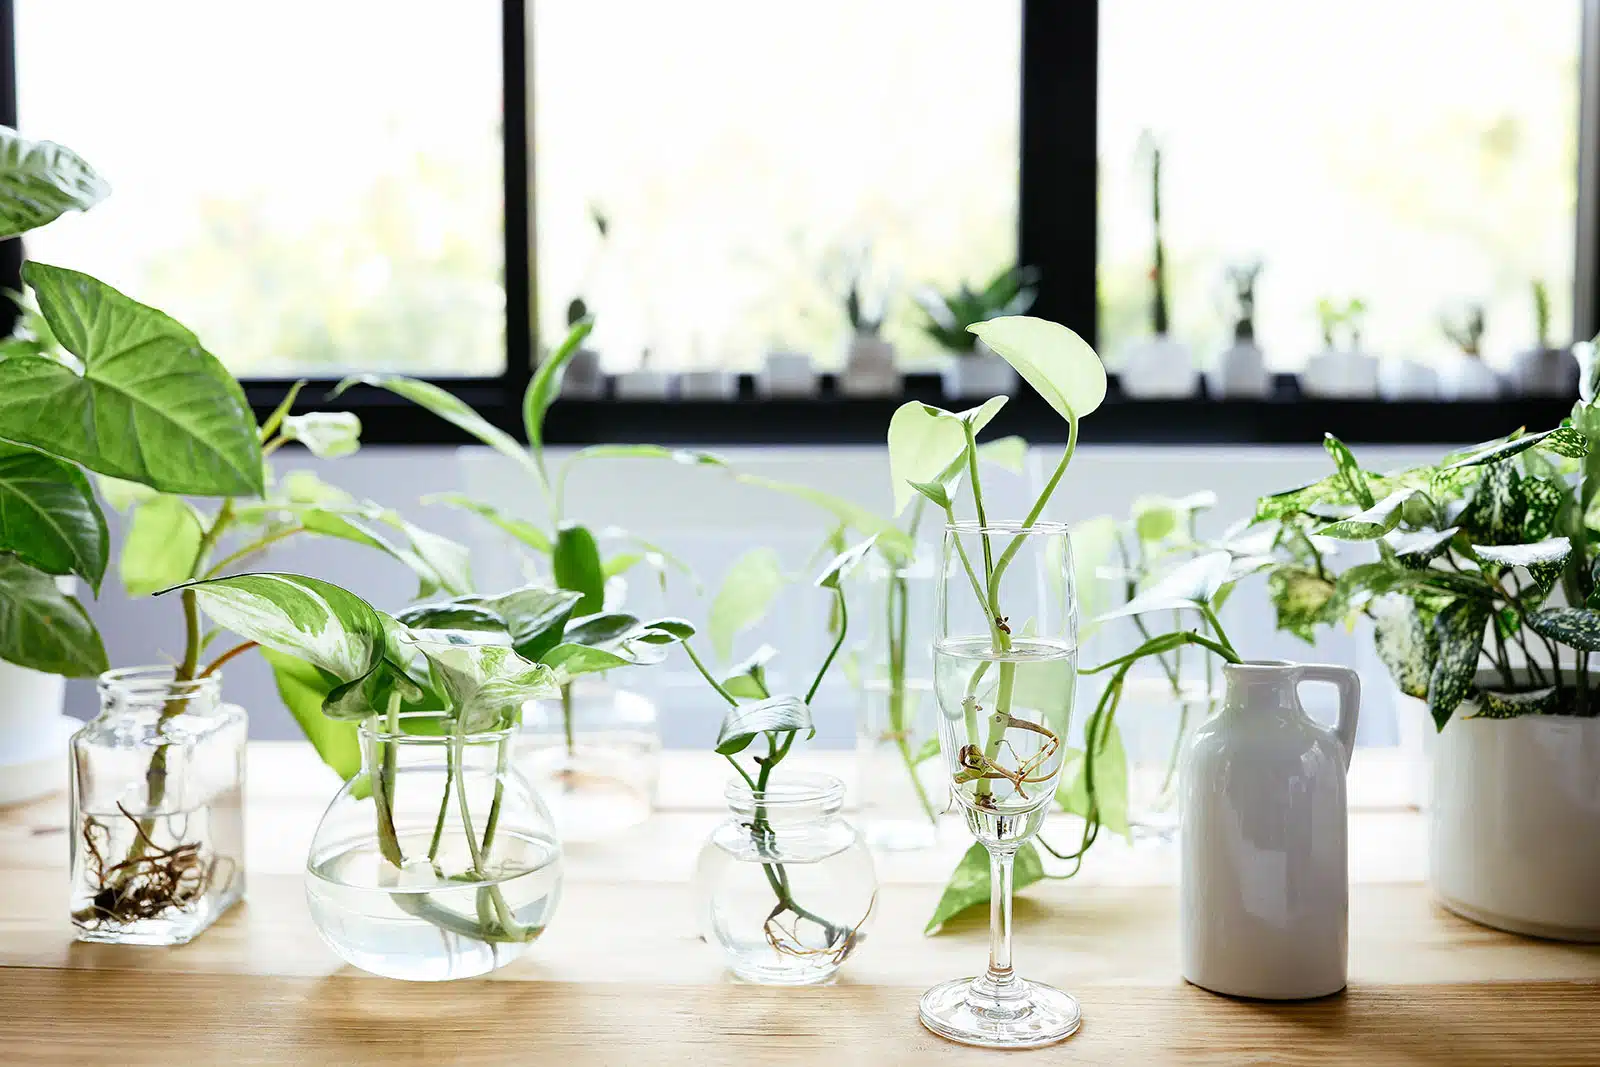 6 mistakes to avoid when propagating plants in water – and what to do instead